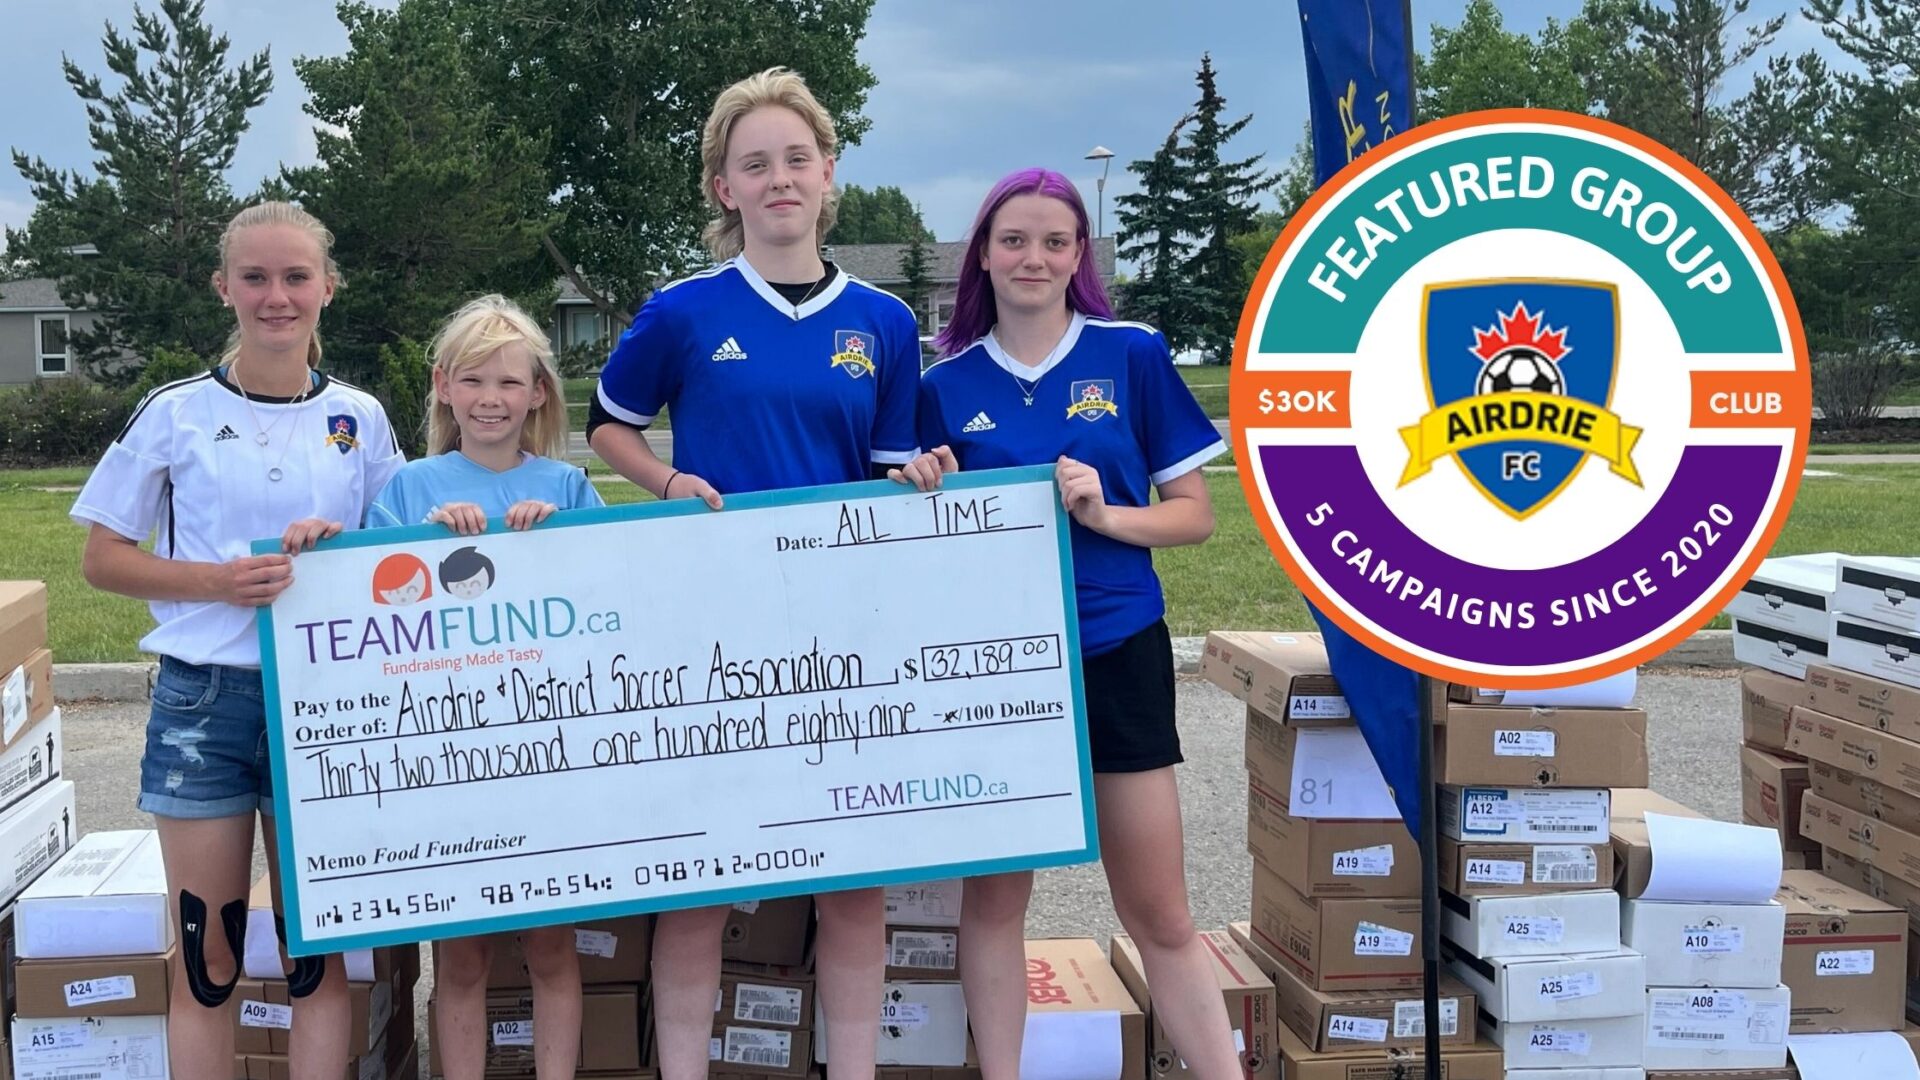 Airdrie & District Soccer Association has raised over $32,000 with food using TeamFund's Fill Your Freezer Fundraiser.